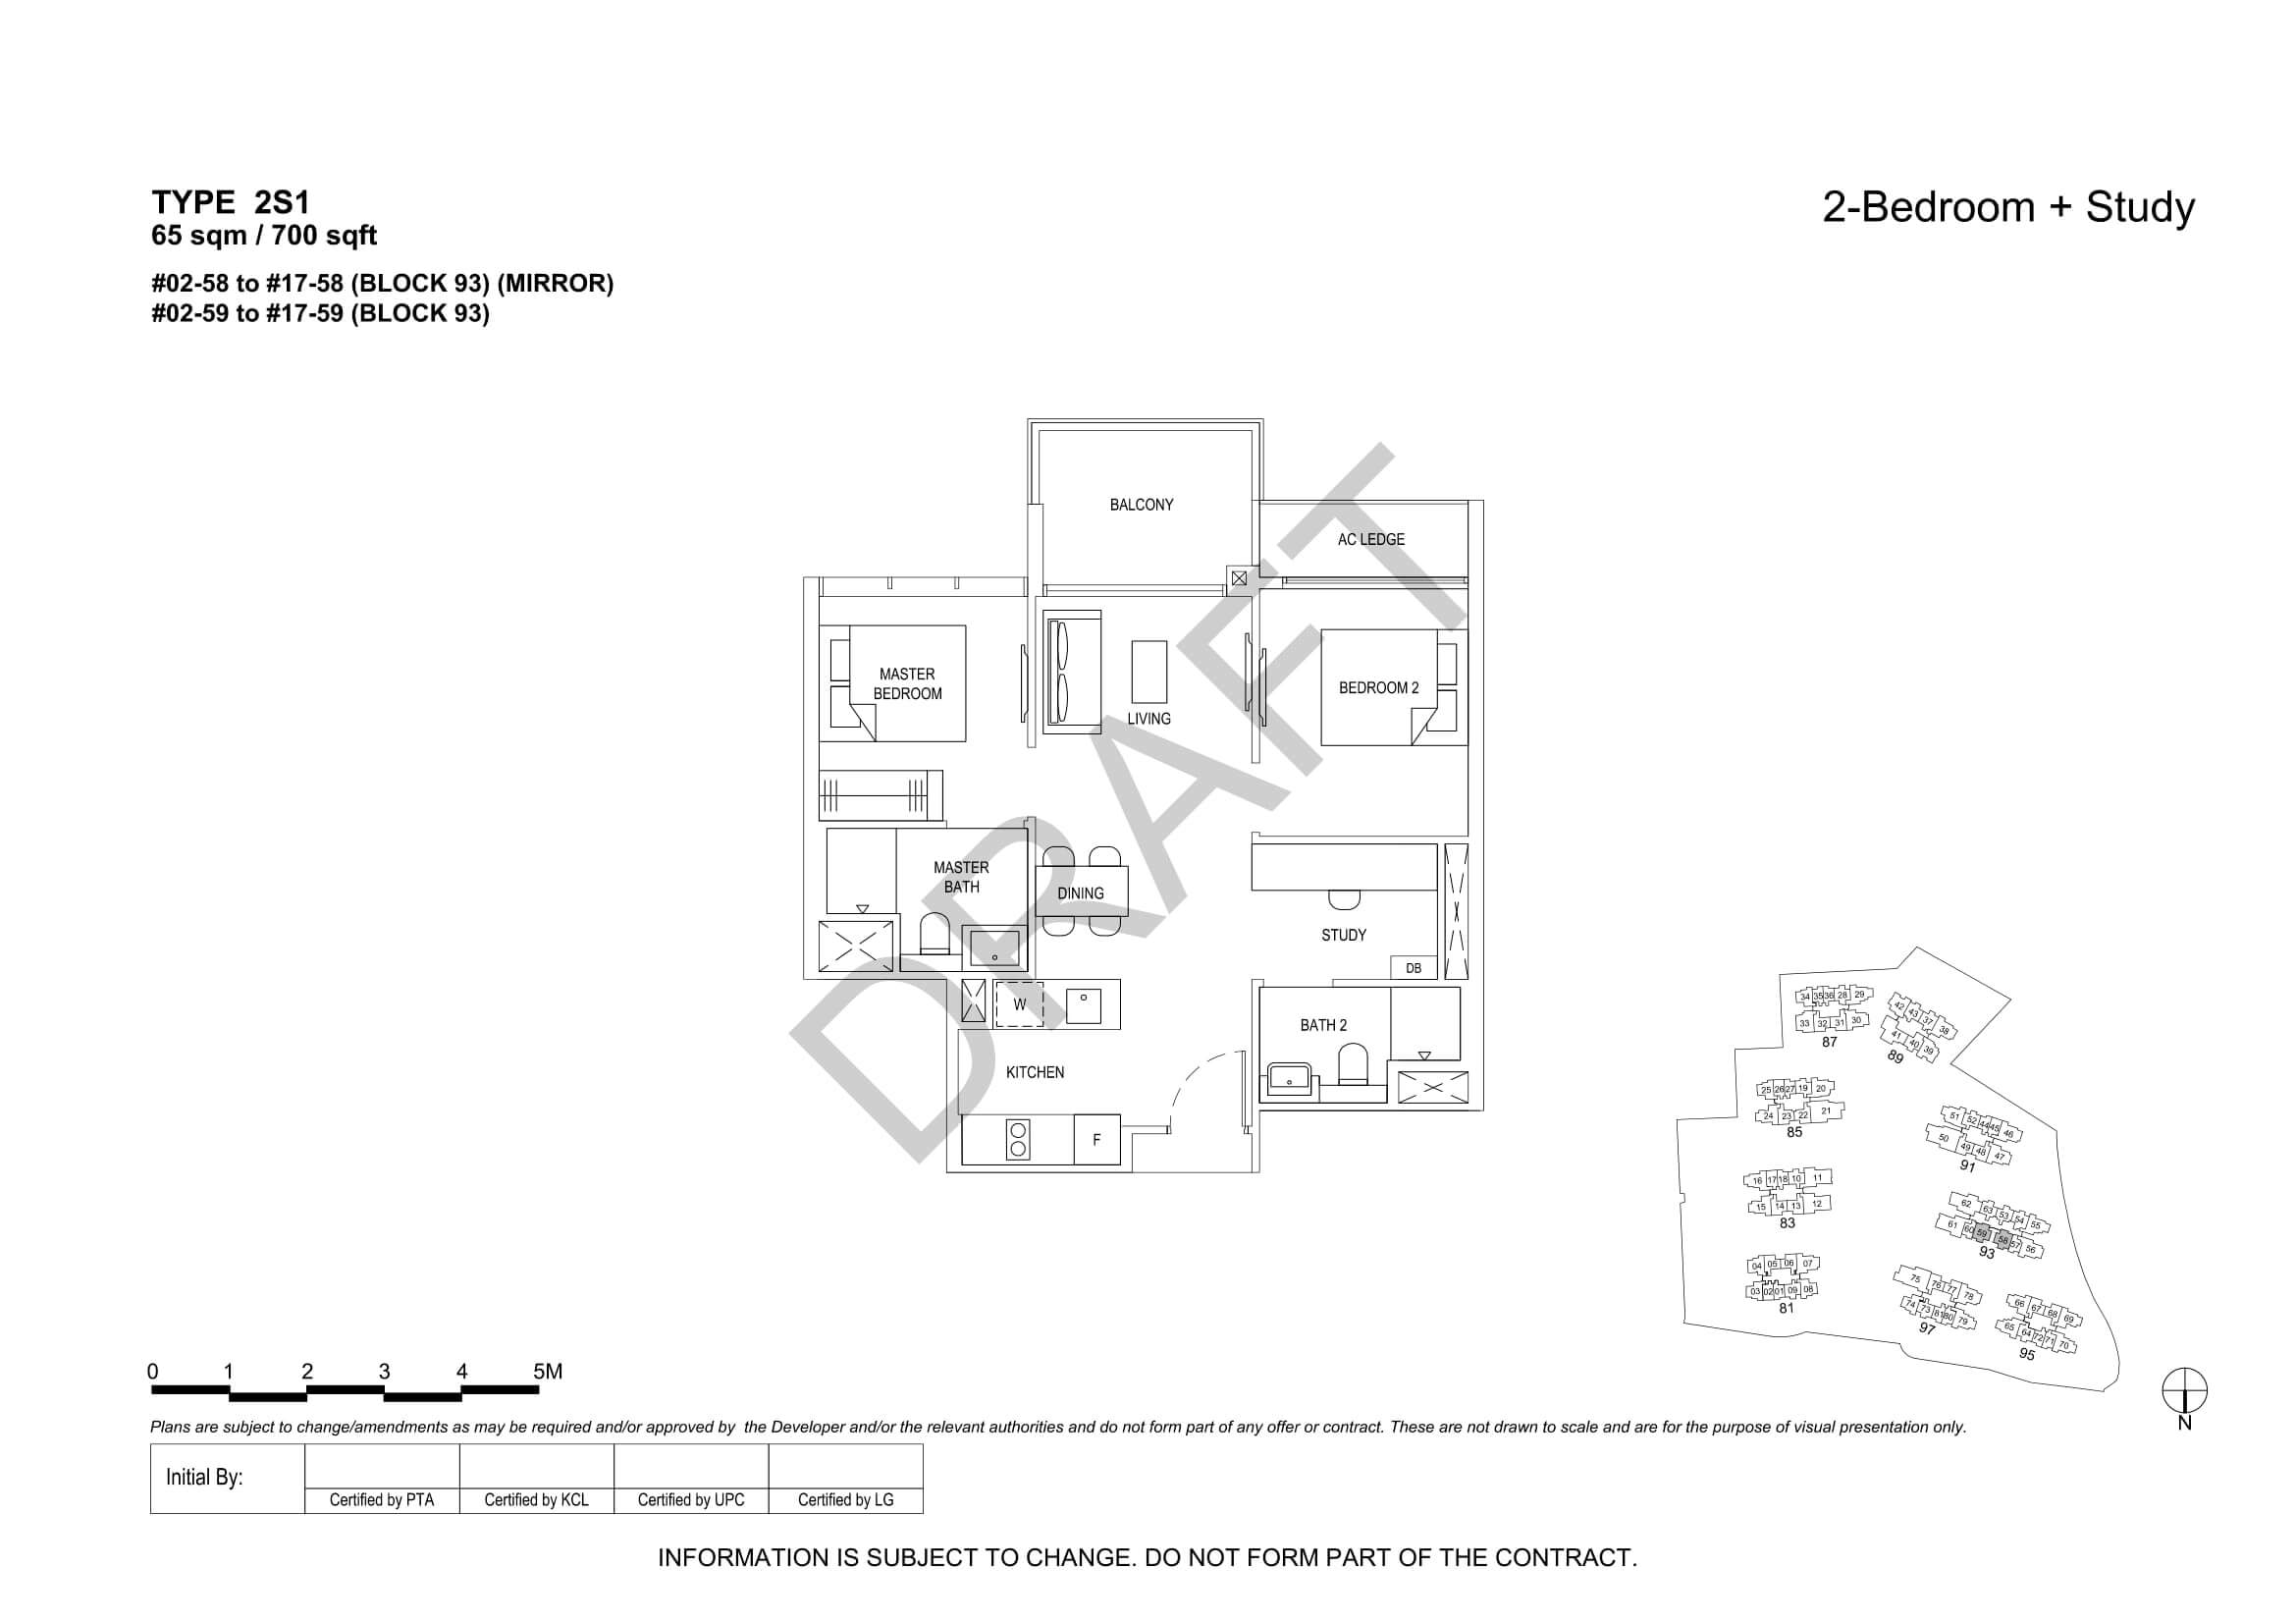 The Florence Residences Floor Plan 2-Bedroom Study Type 2S1